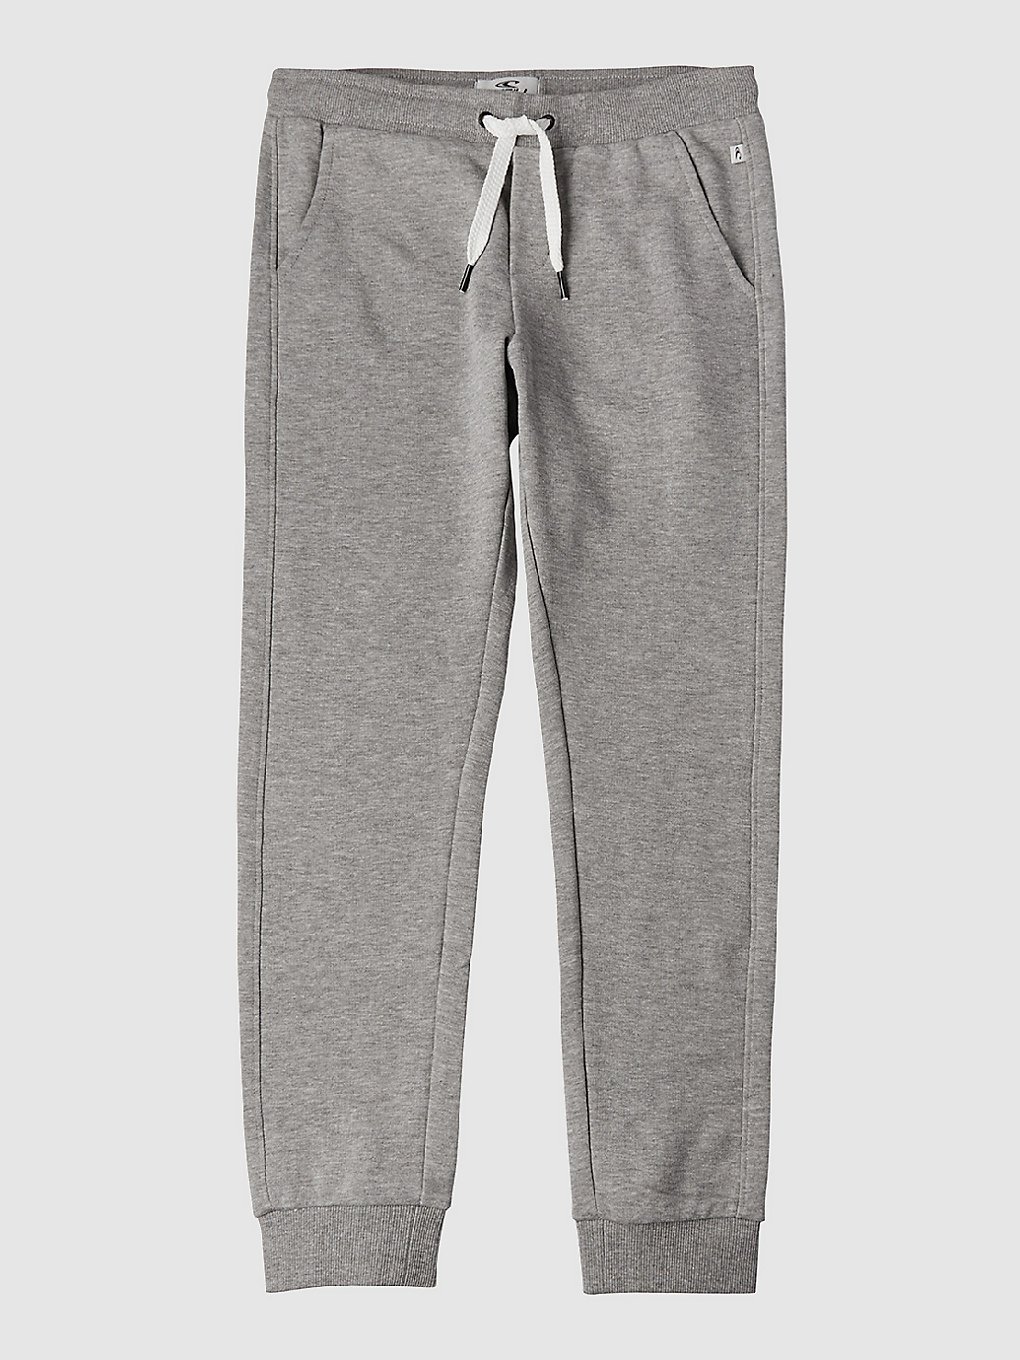 O'Neill All Year Jogging Pants silver melee kaufen